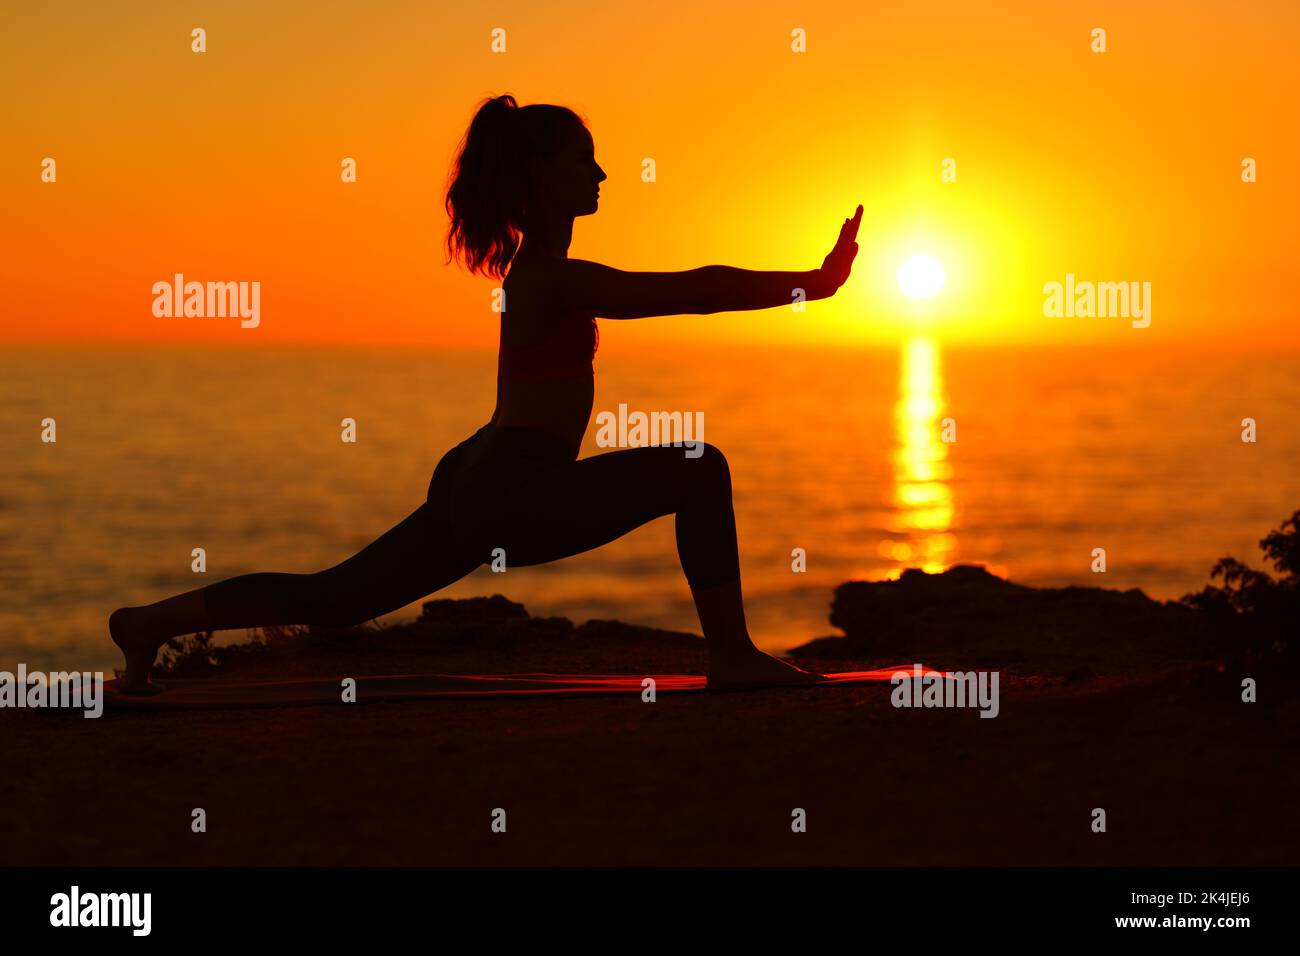 Profile of a woman silhouette doing tai chi at sunset on the beach Stock Photo